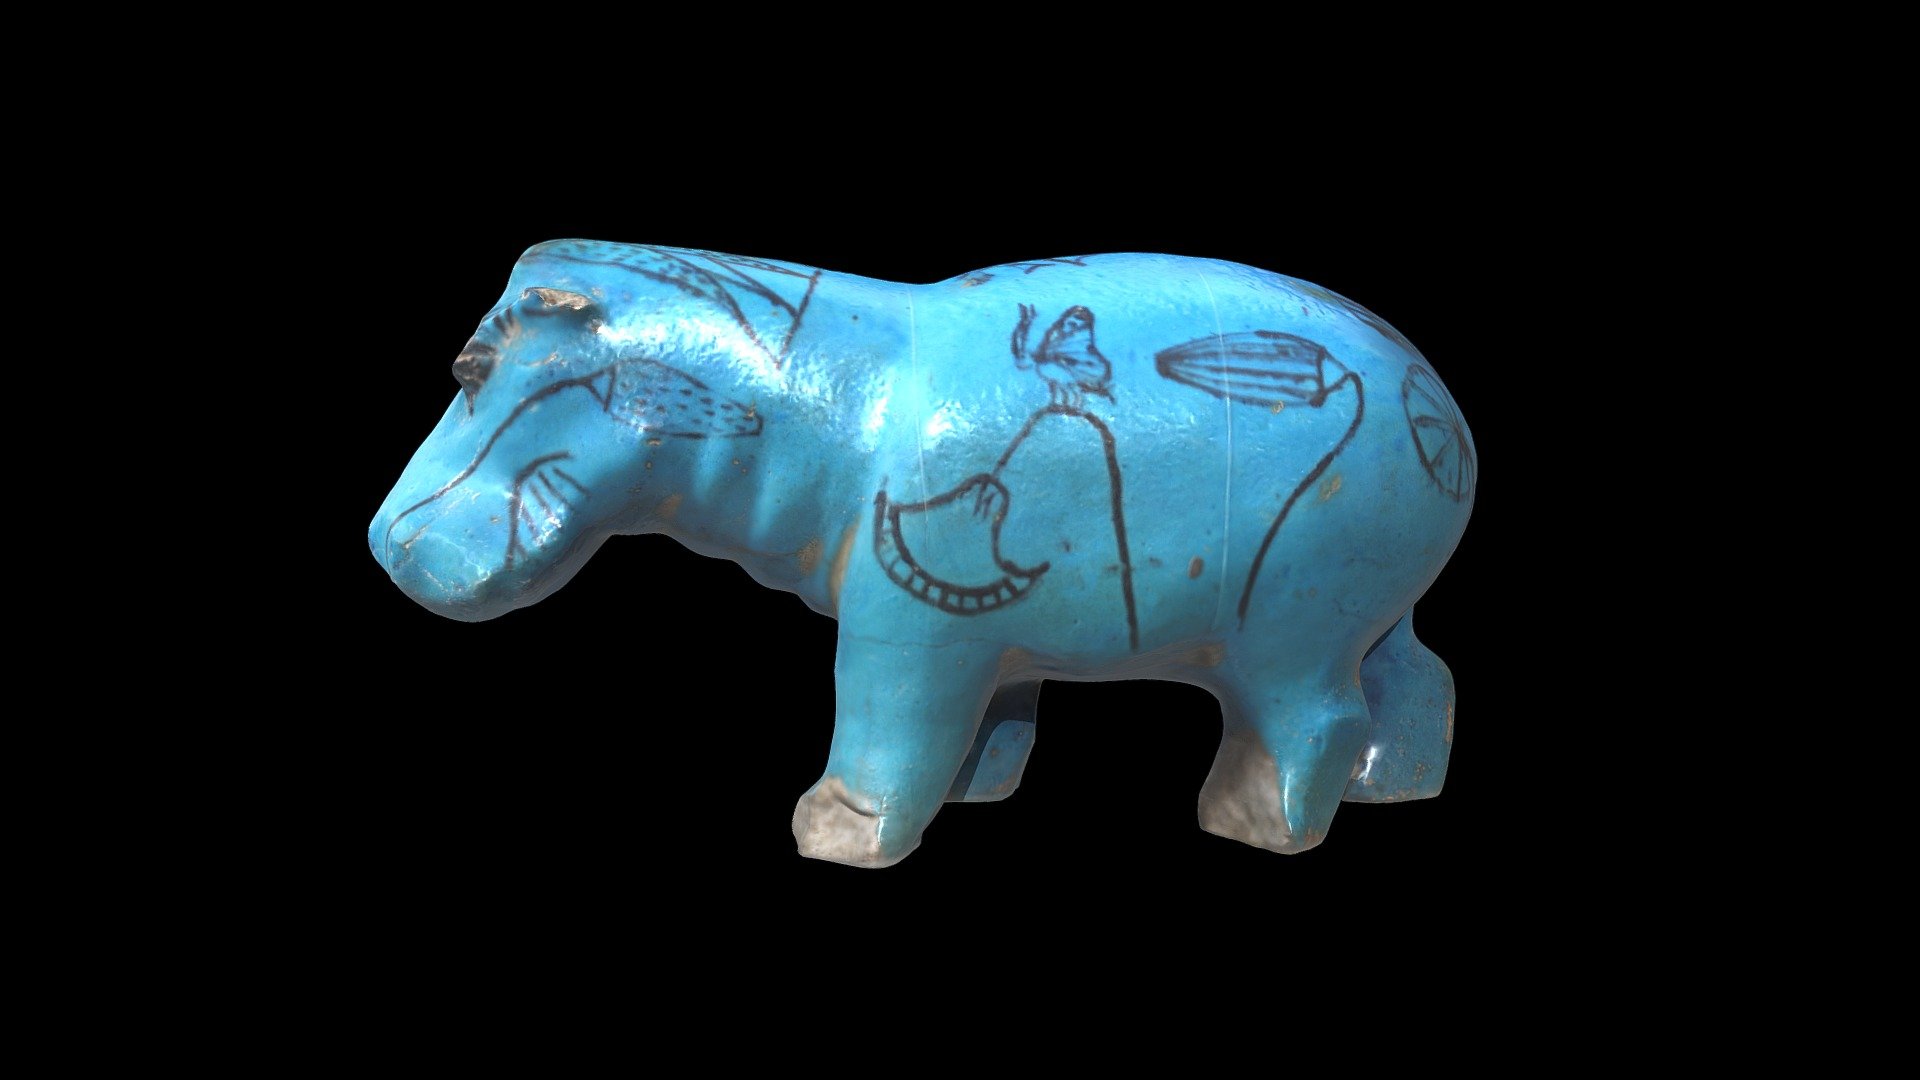 Faience hippopotamus from Dra’ Abu el-Naga, Western Thebes.  Middle Kingdom, 11th Dynasty in date.  Currently in the the Egyptian Museum, Cairo, Egypt. .  Cairo Museum number JE 21365.  White lines seen on its sides and back are from monofilament used to secure it to its museum mount.

Photographed in November 2022.

Created from 142 photographs using Metashape 1.8.4 3d model